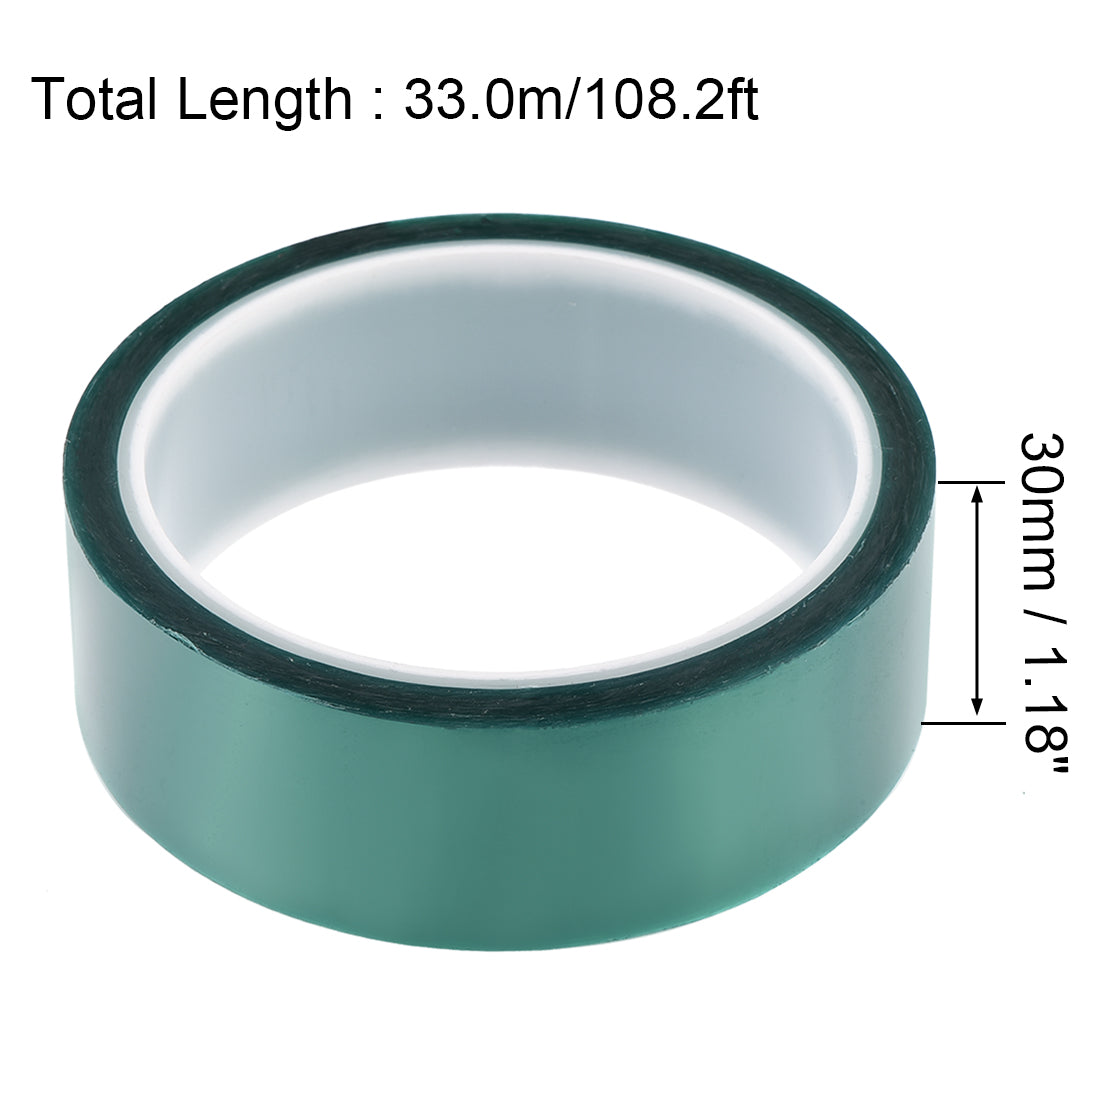 uxcell Uxcell 30mm PET Tape Green High Temperature Tape 33.0m/108.2ft